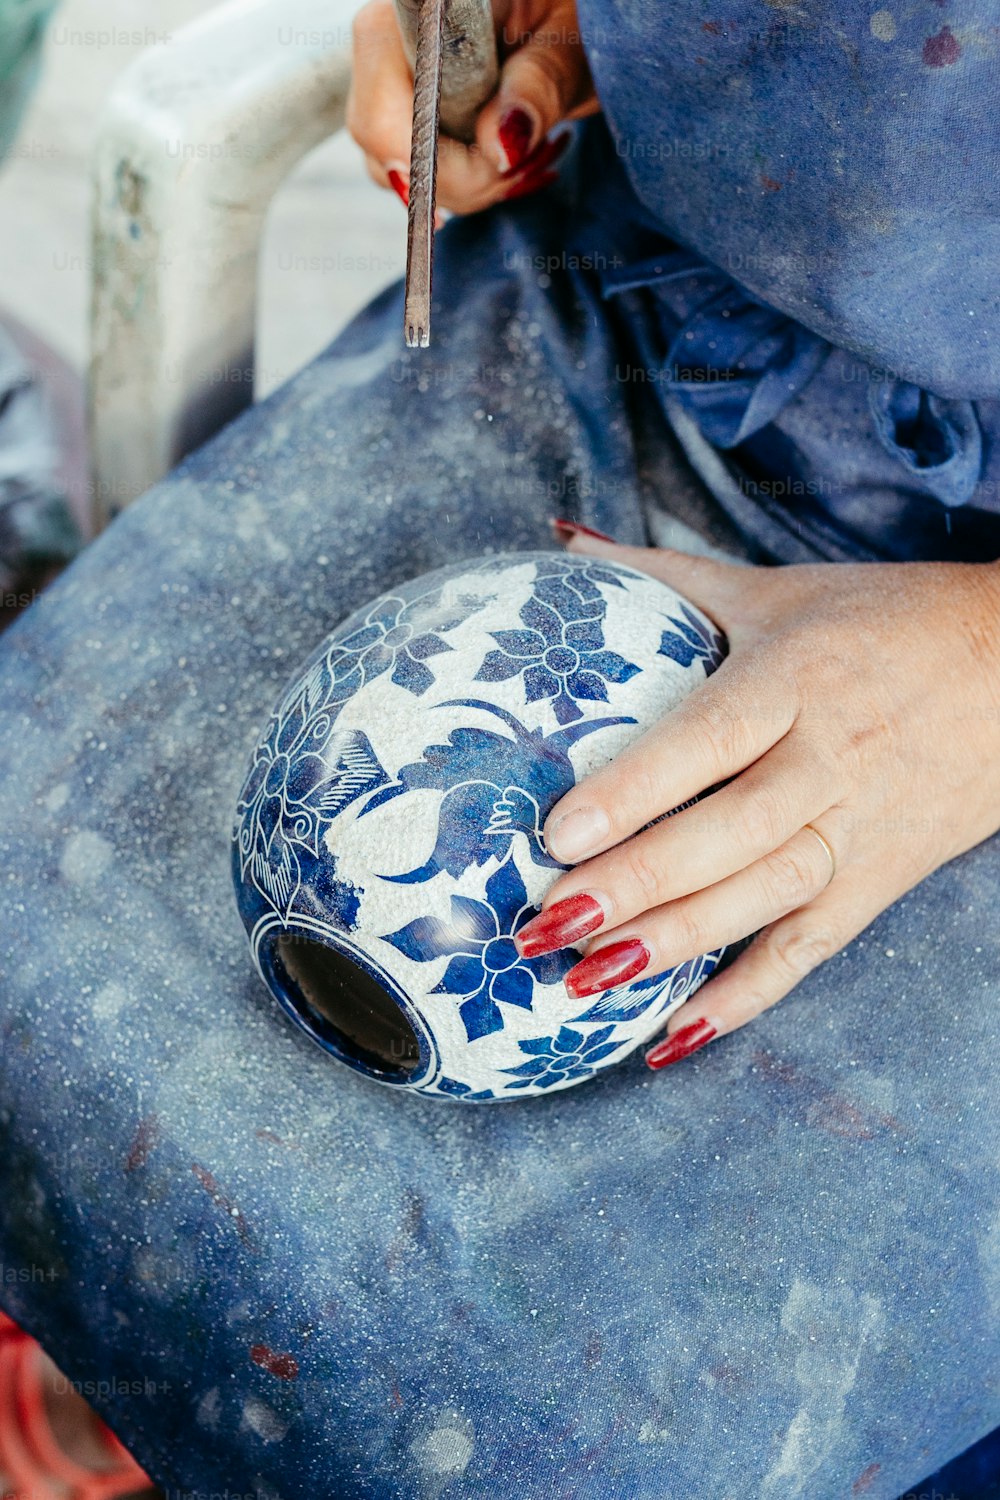 a woman is holding a blue and white vase